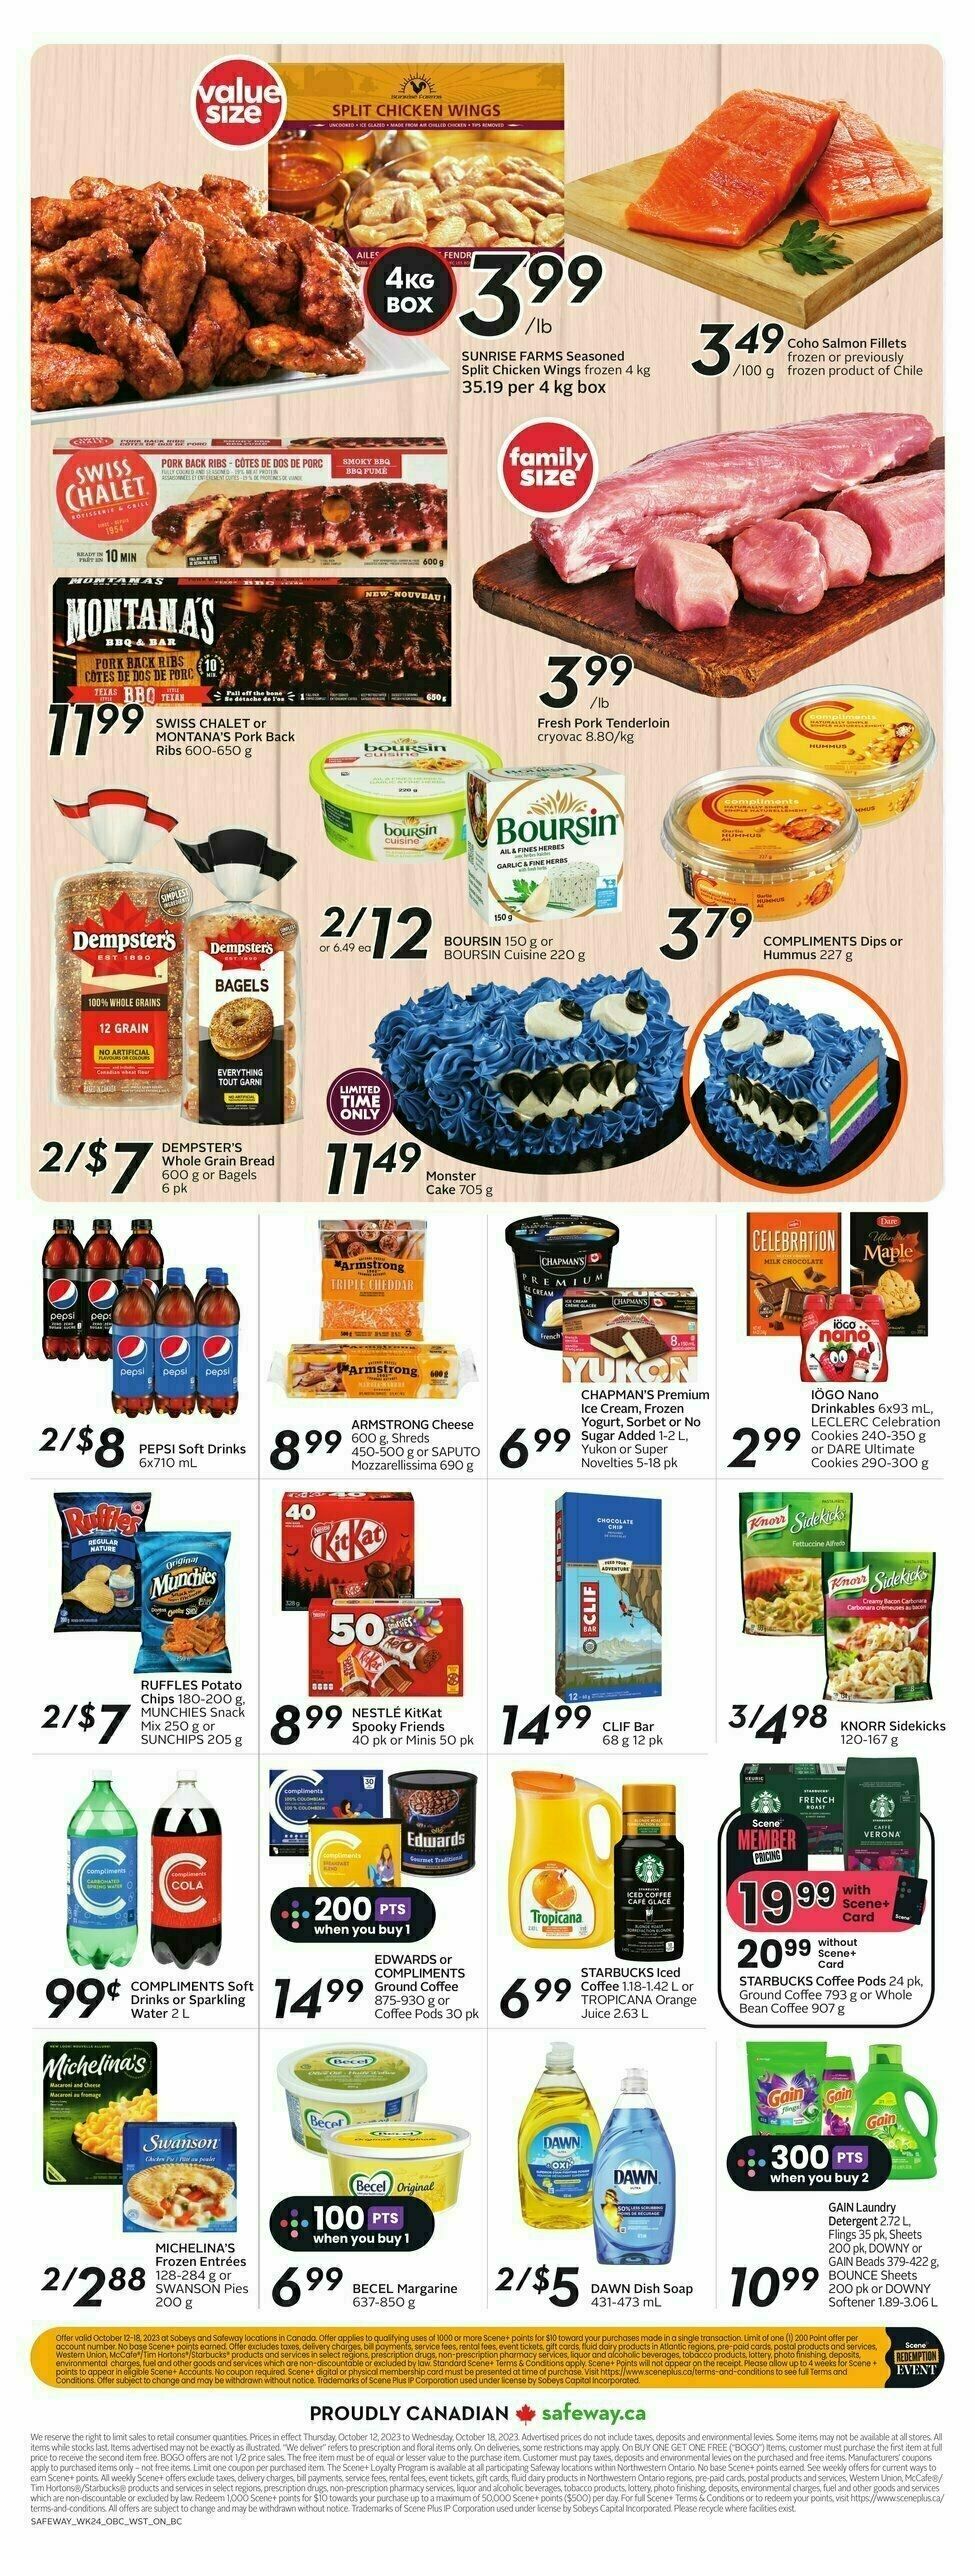 Safeway Flyer from October 12